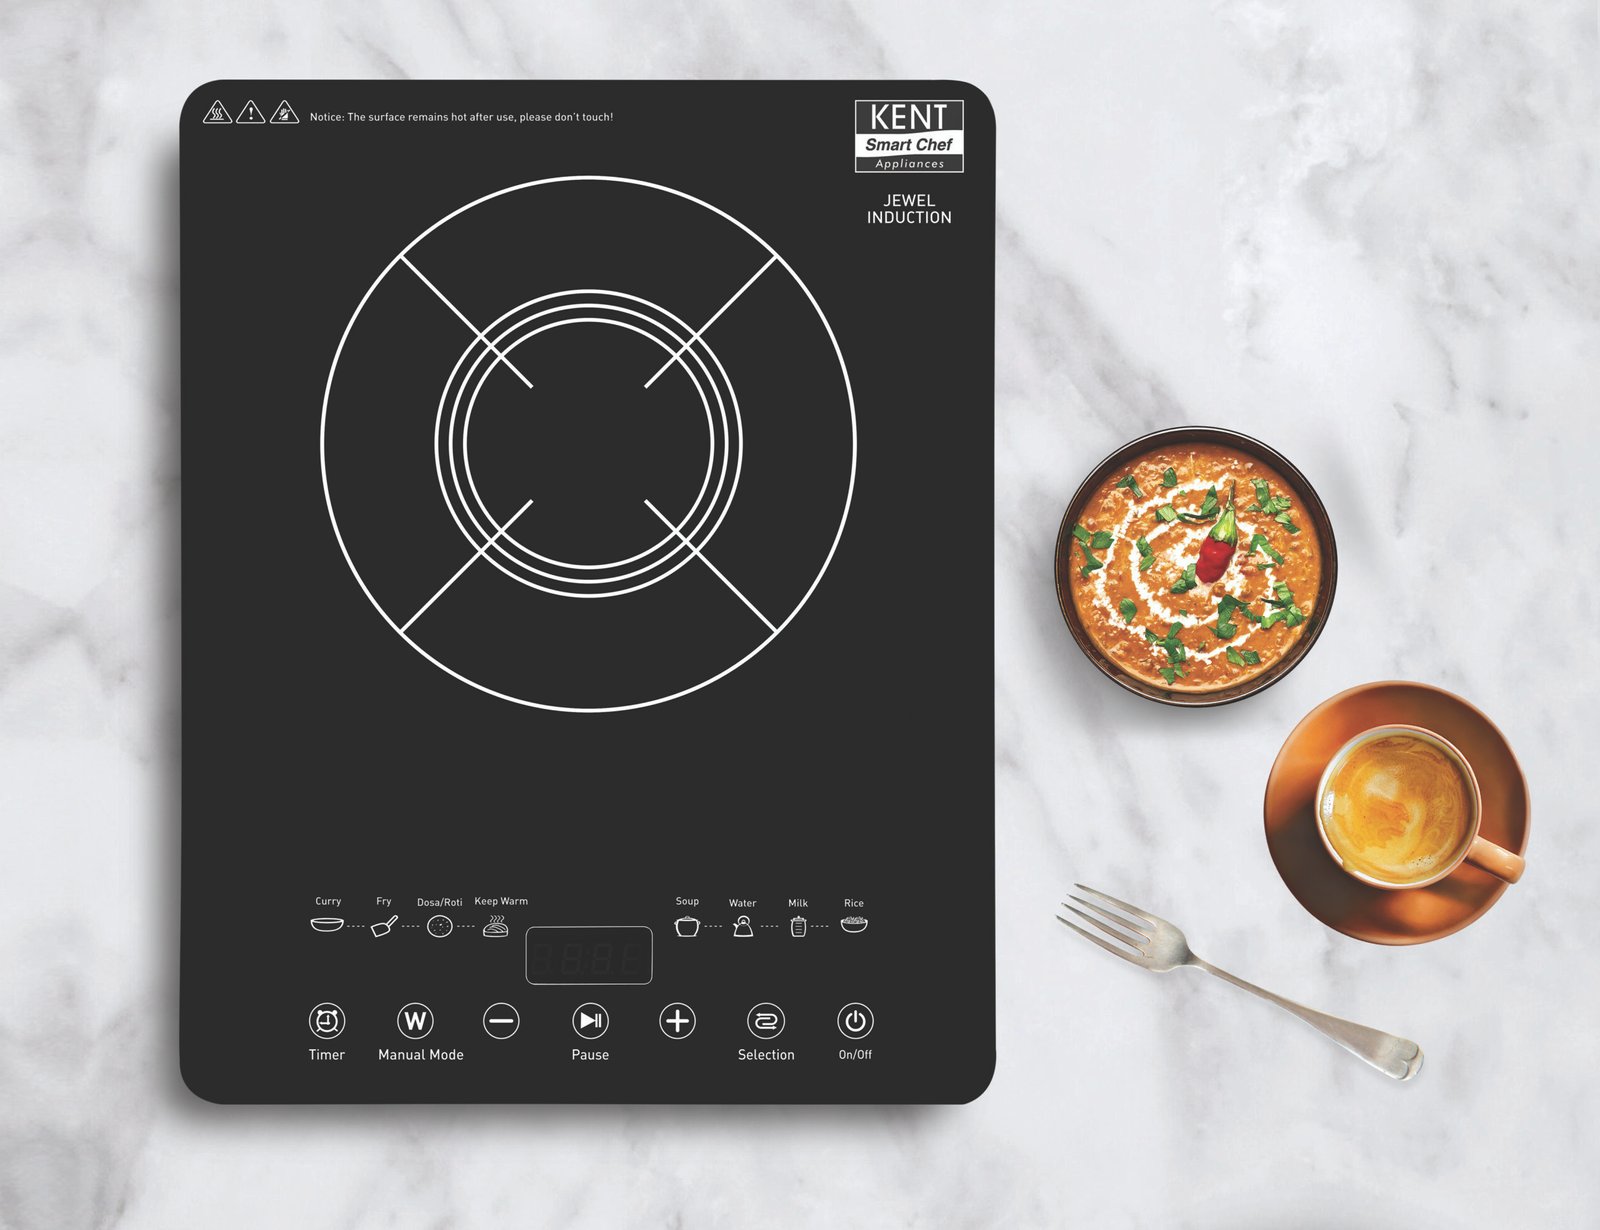 KENT Jewel Induction Cooktop scaled